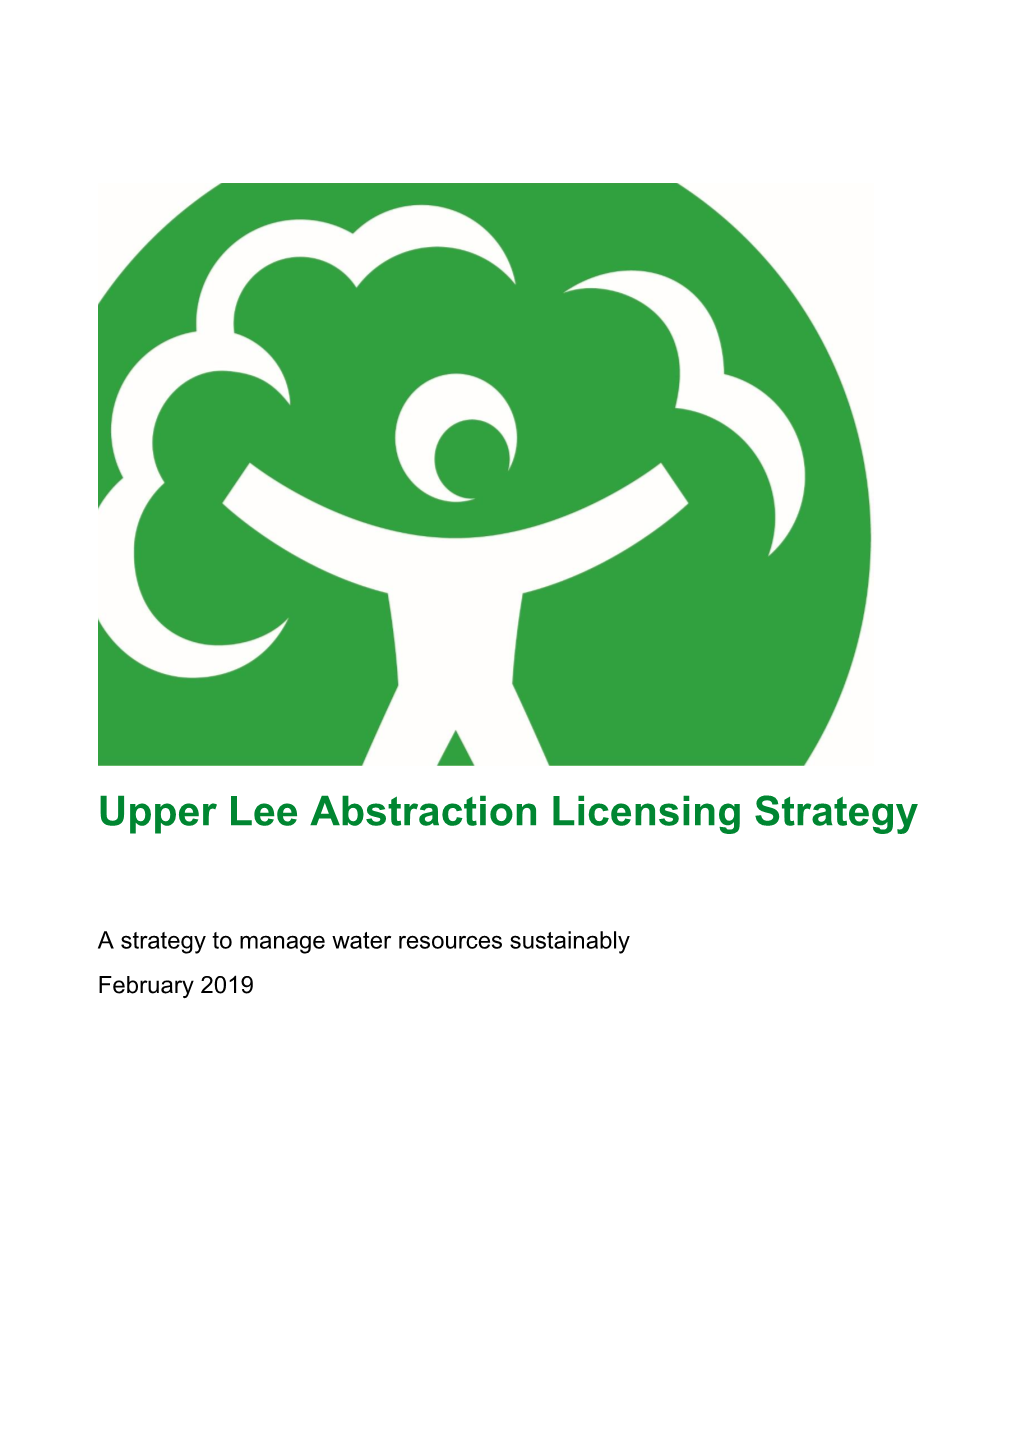 Upper Lee Abstraction Licensing Strategy